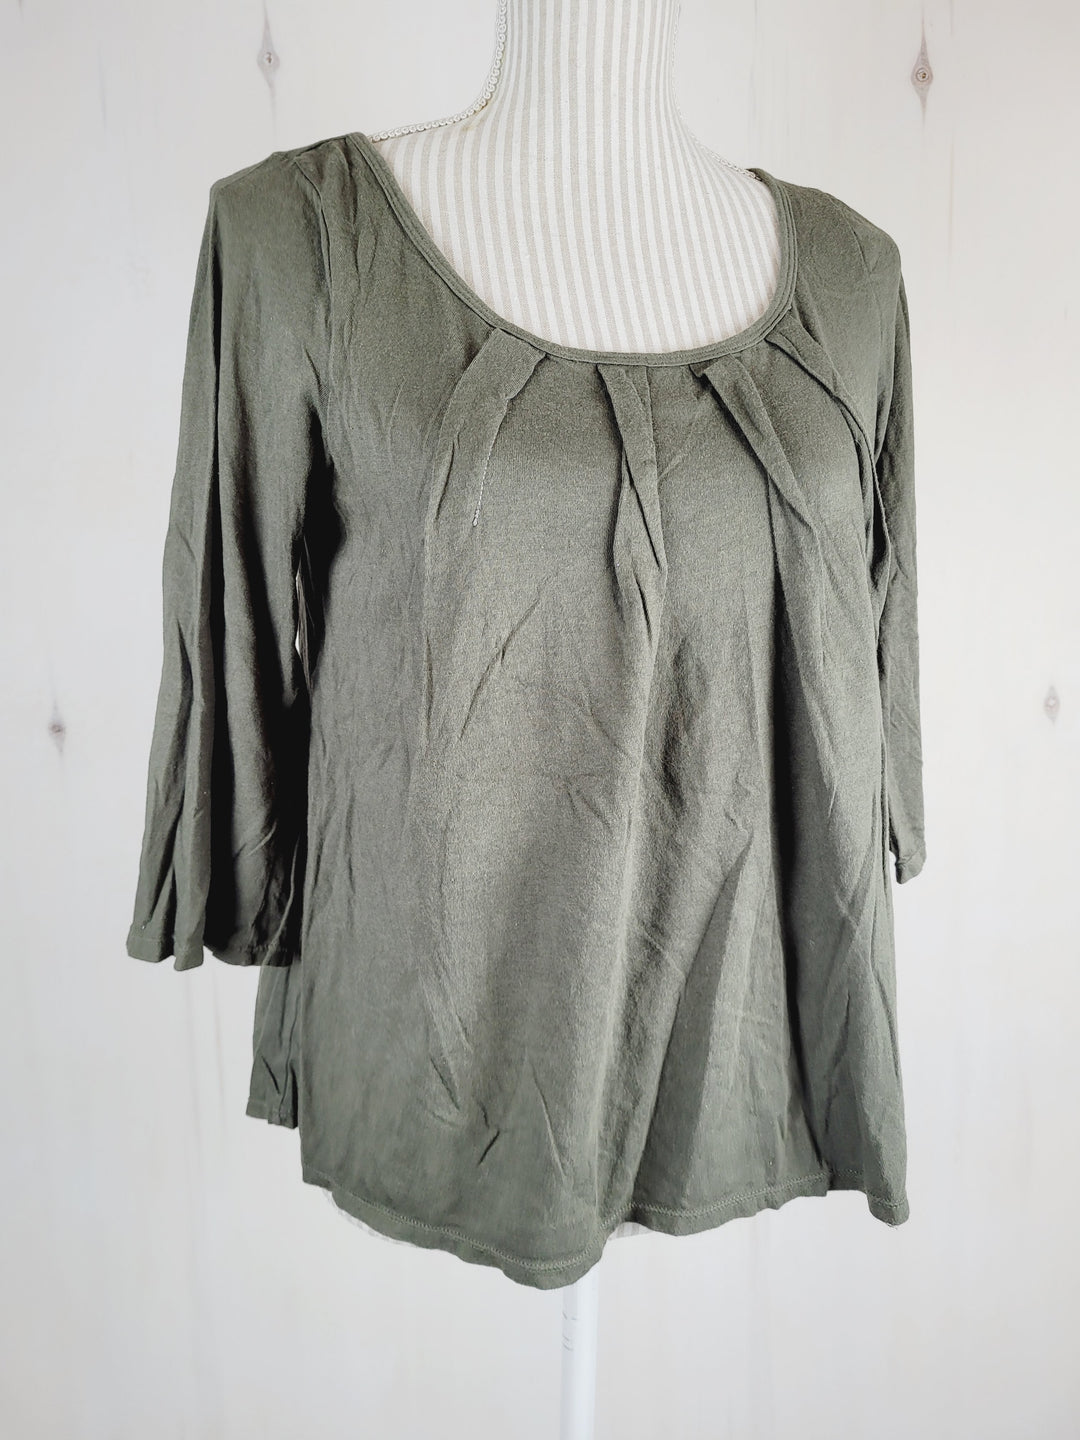 OLD NAVY GREEN TOP WITH PLEATING LADIES MEDIUM VGUC